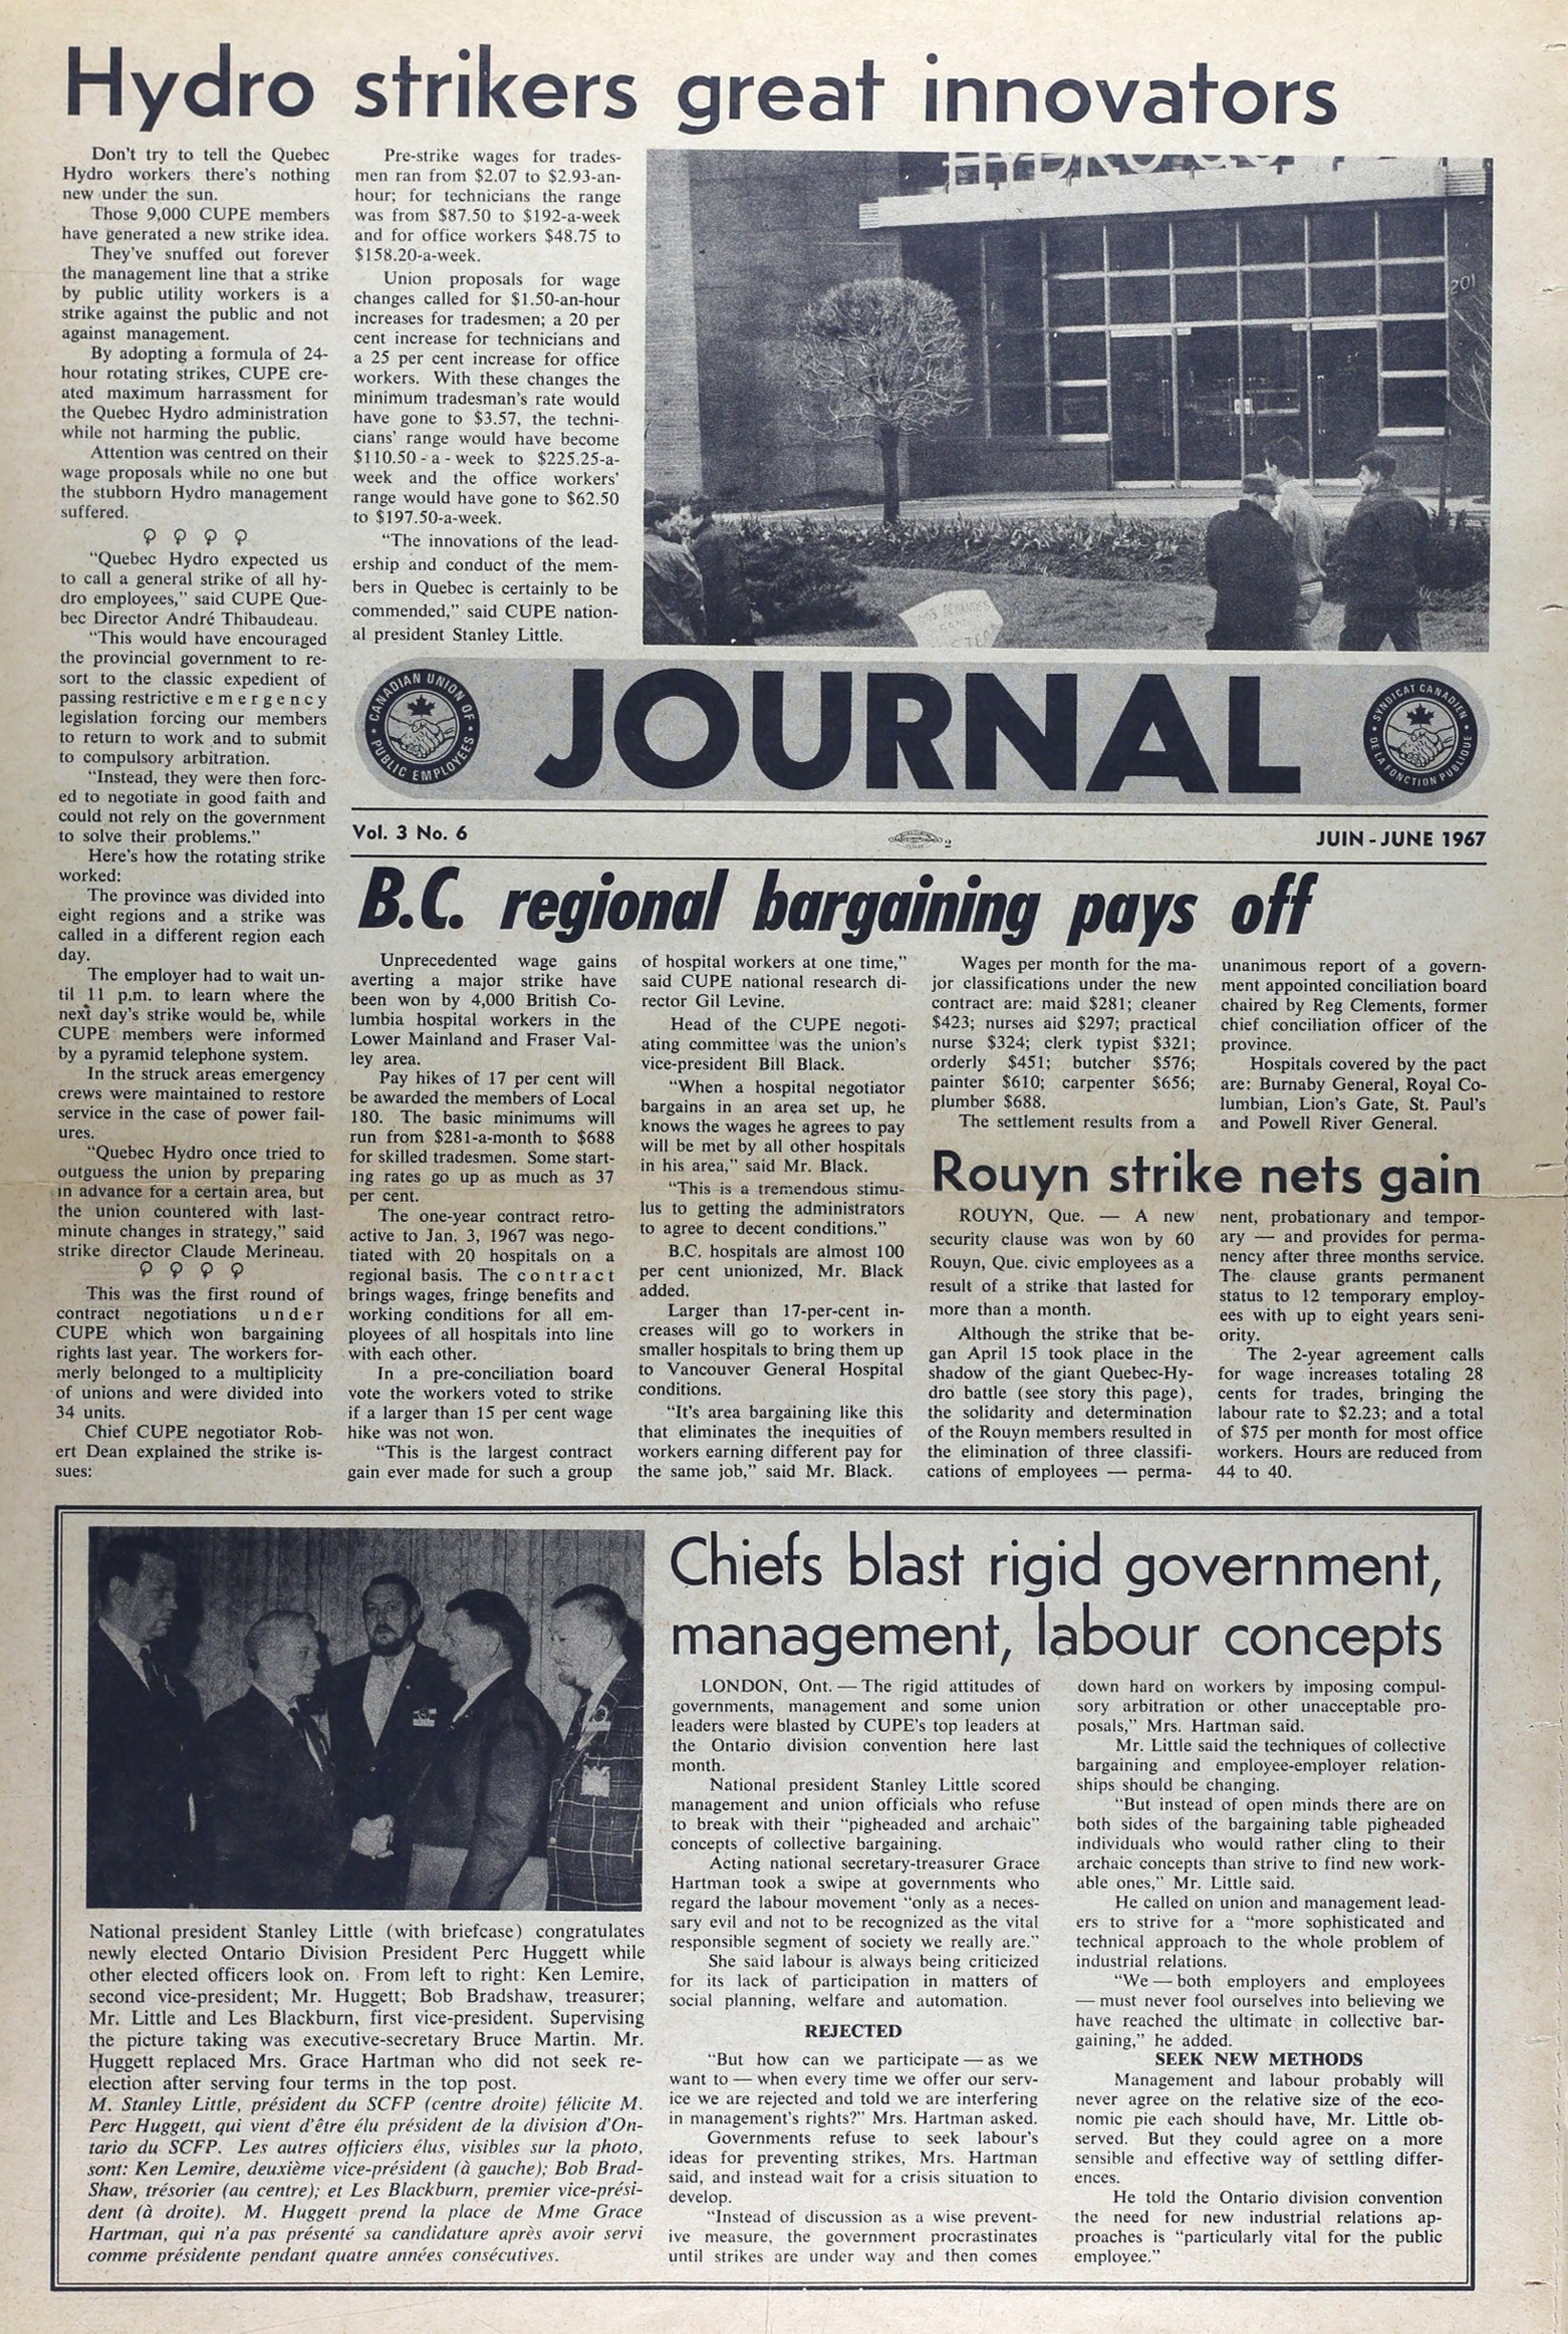 Journal, CUPE, June 1967, p.1  